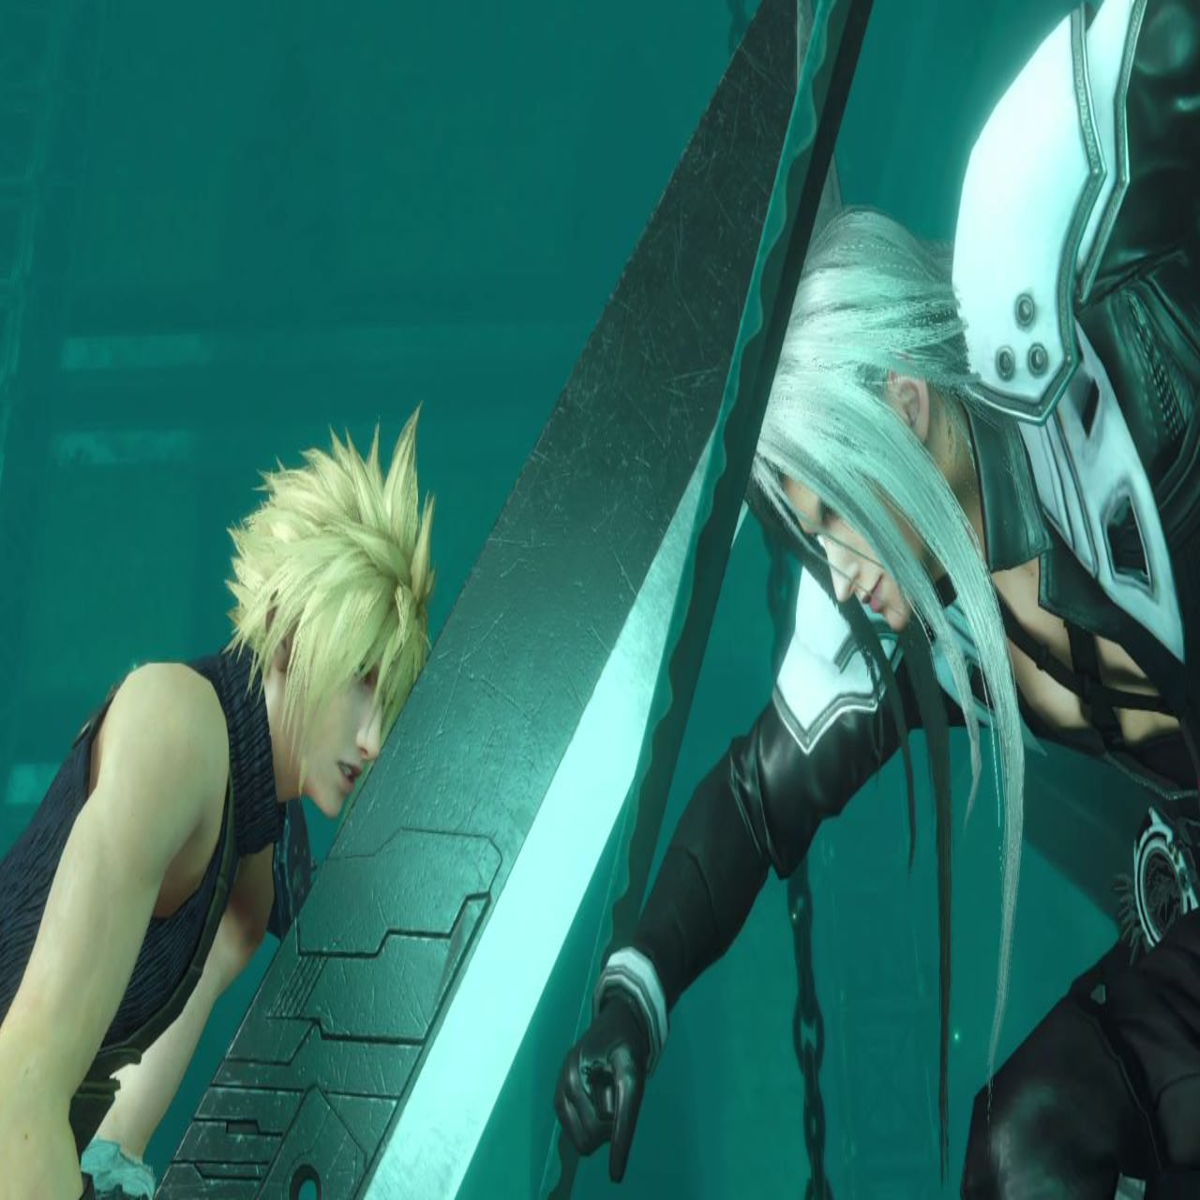 Final Fantasy VII Ever Crisis is coming to PC - Xfire